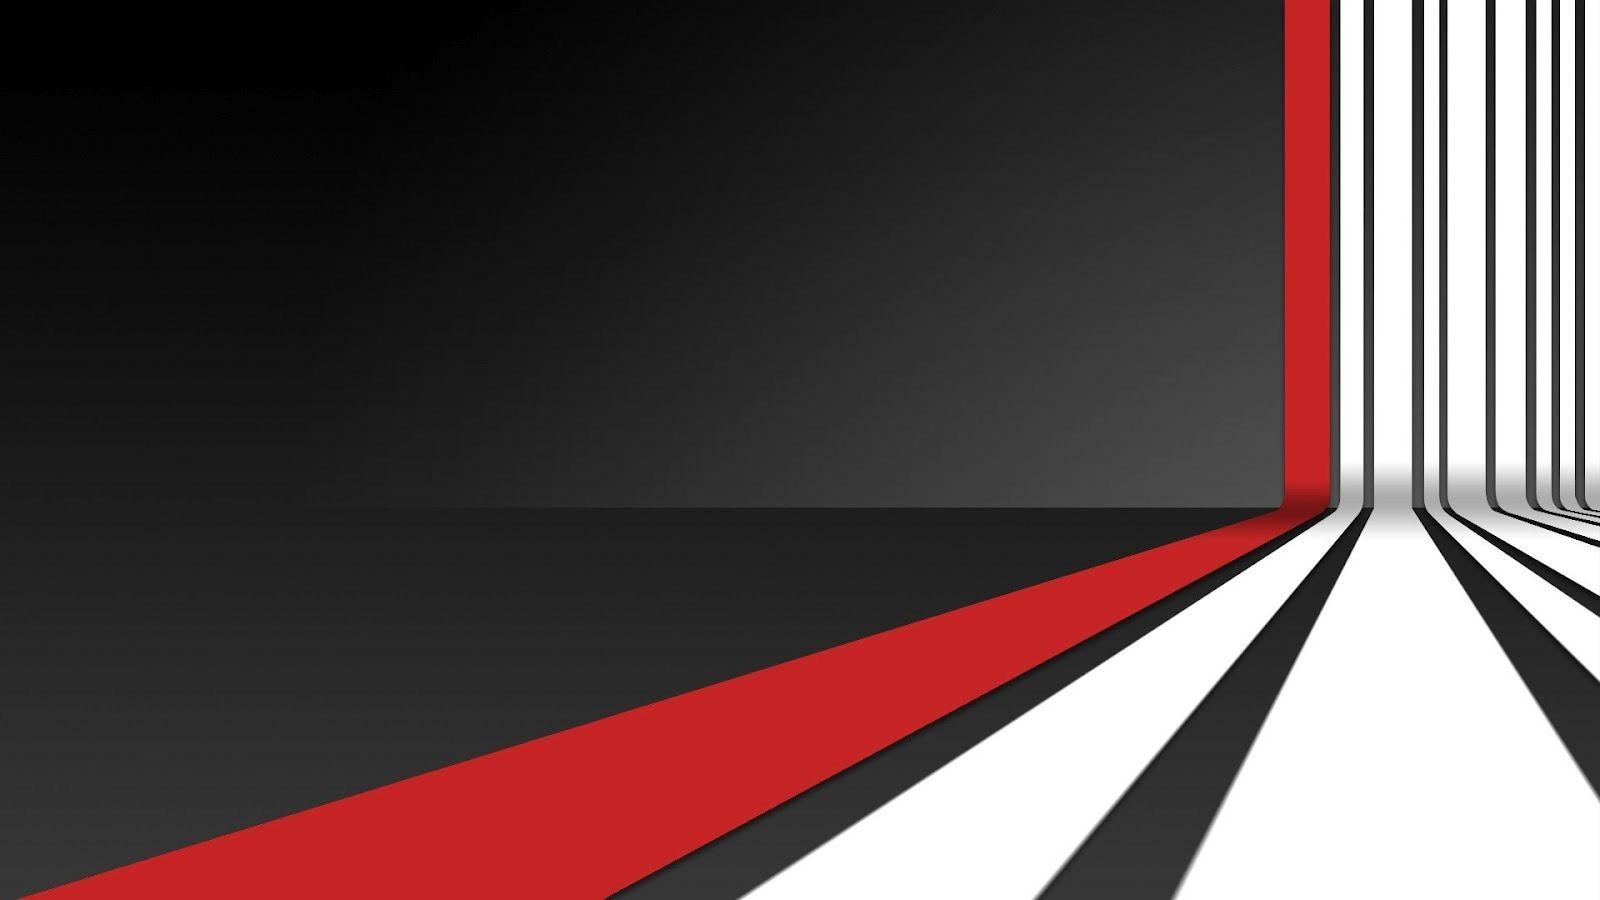 Black And Red HD Wallpaper White Line Background. Vegas Legal Magazine